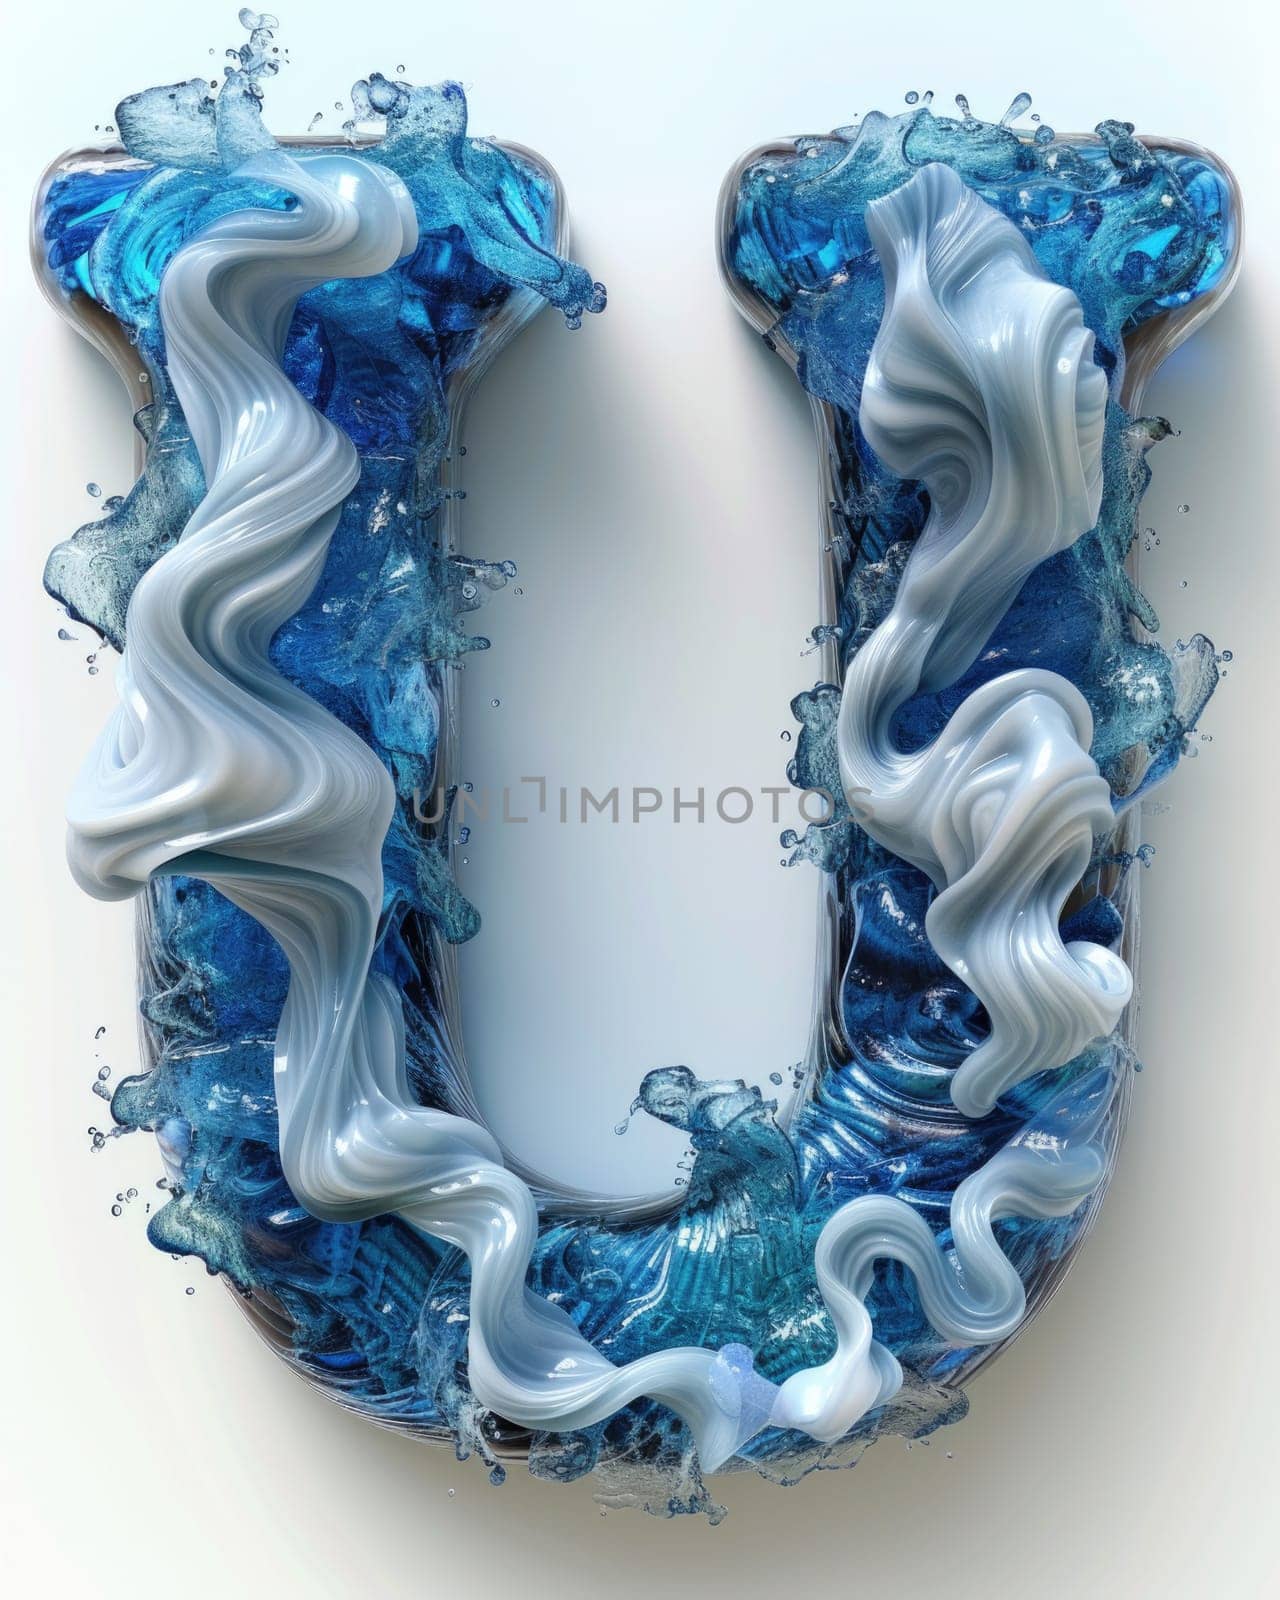 A letter created from intricate blue and white swirls, gently drifting in the sea.